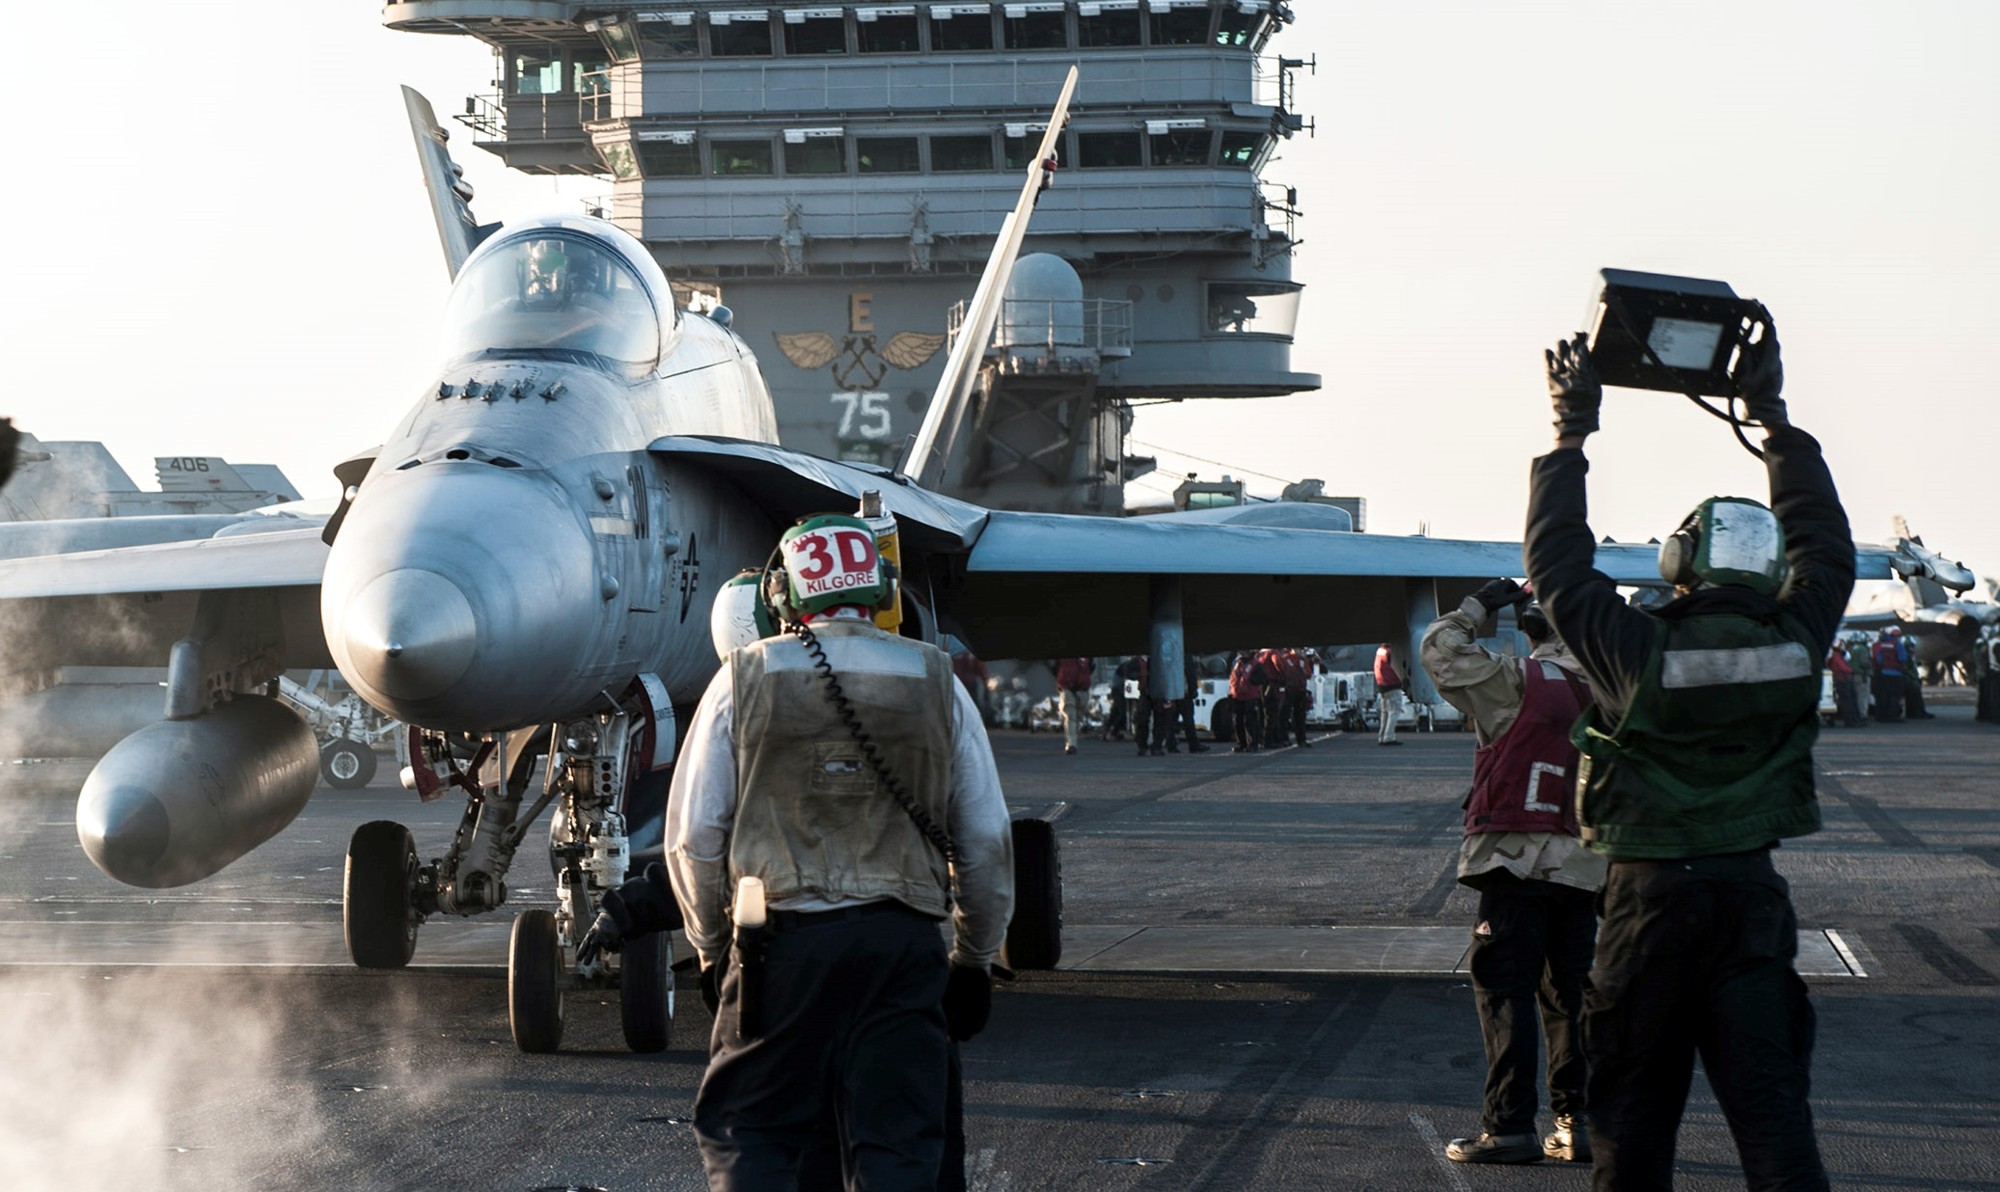 vfa-83 rampagers strike fighter squadron f/a-18c hornet cvw-7 uss harry s. truman cvn-75 61p